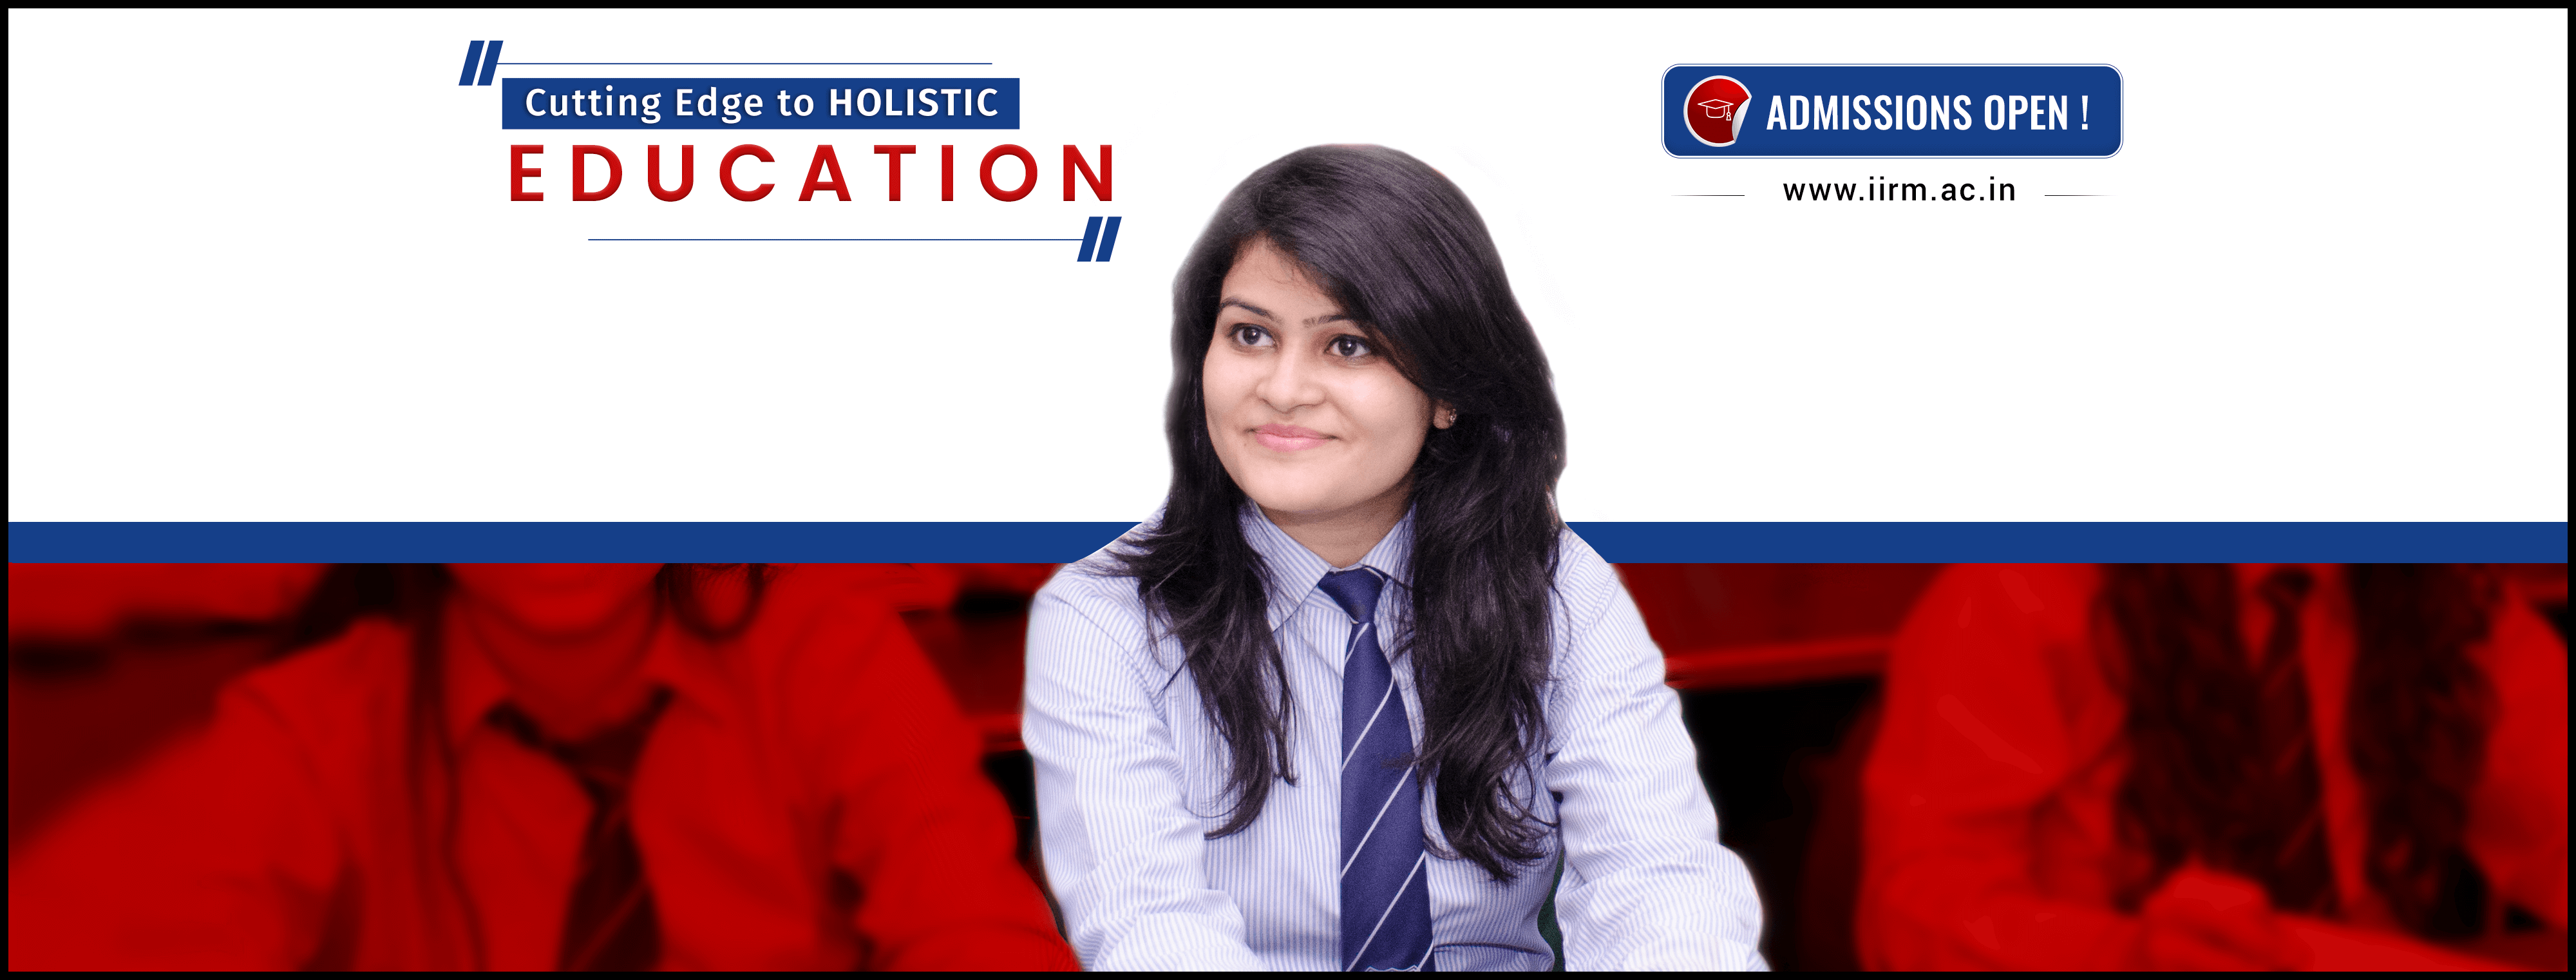 Institute of Rural Management | Highly recommended B school | Top Mba Placements College in Jaipur